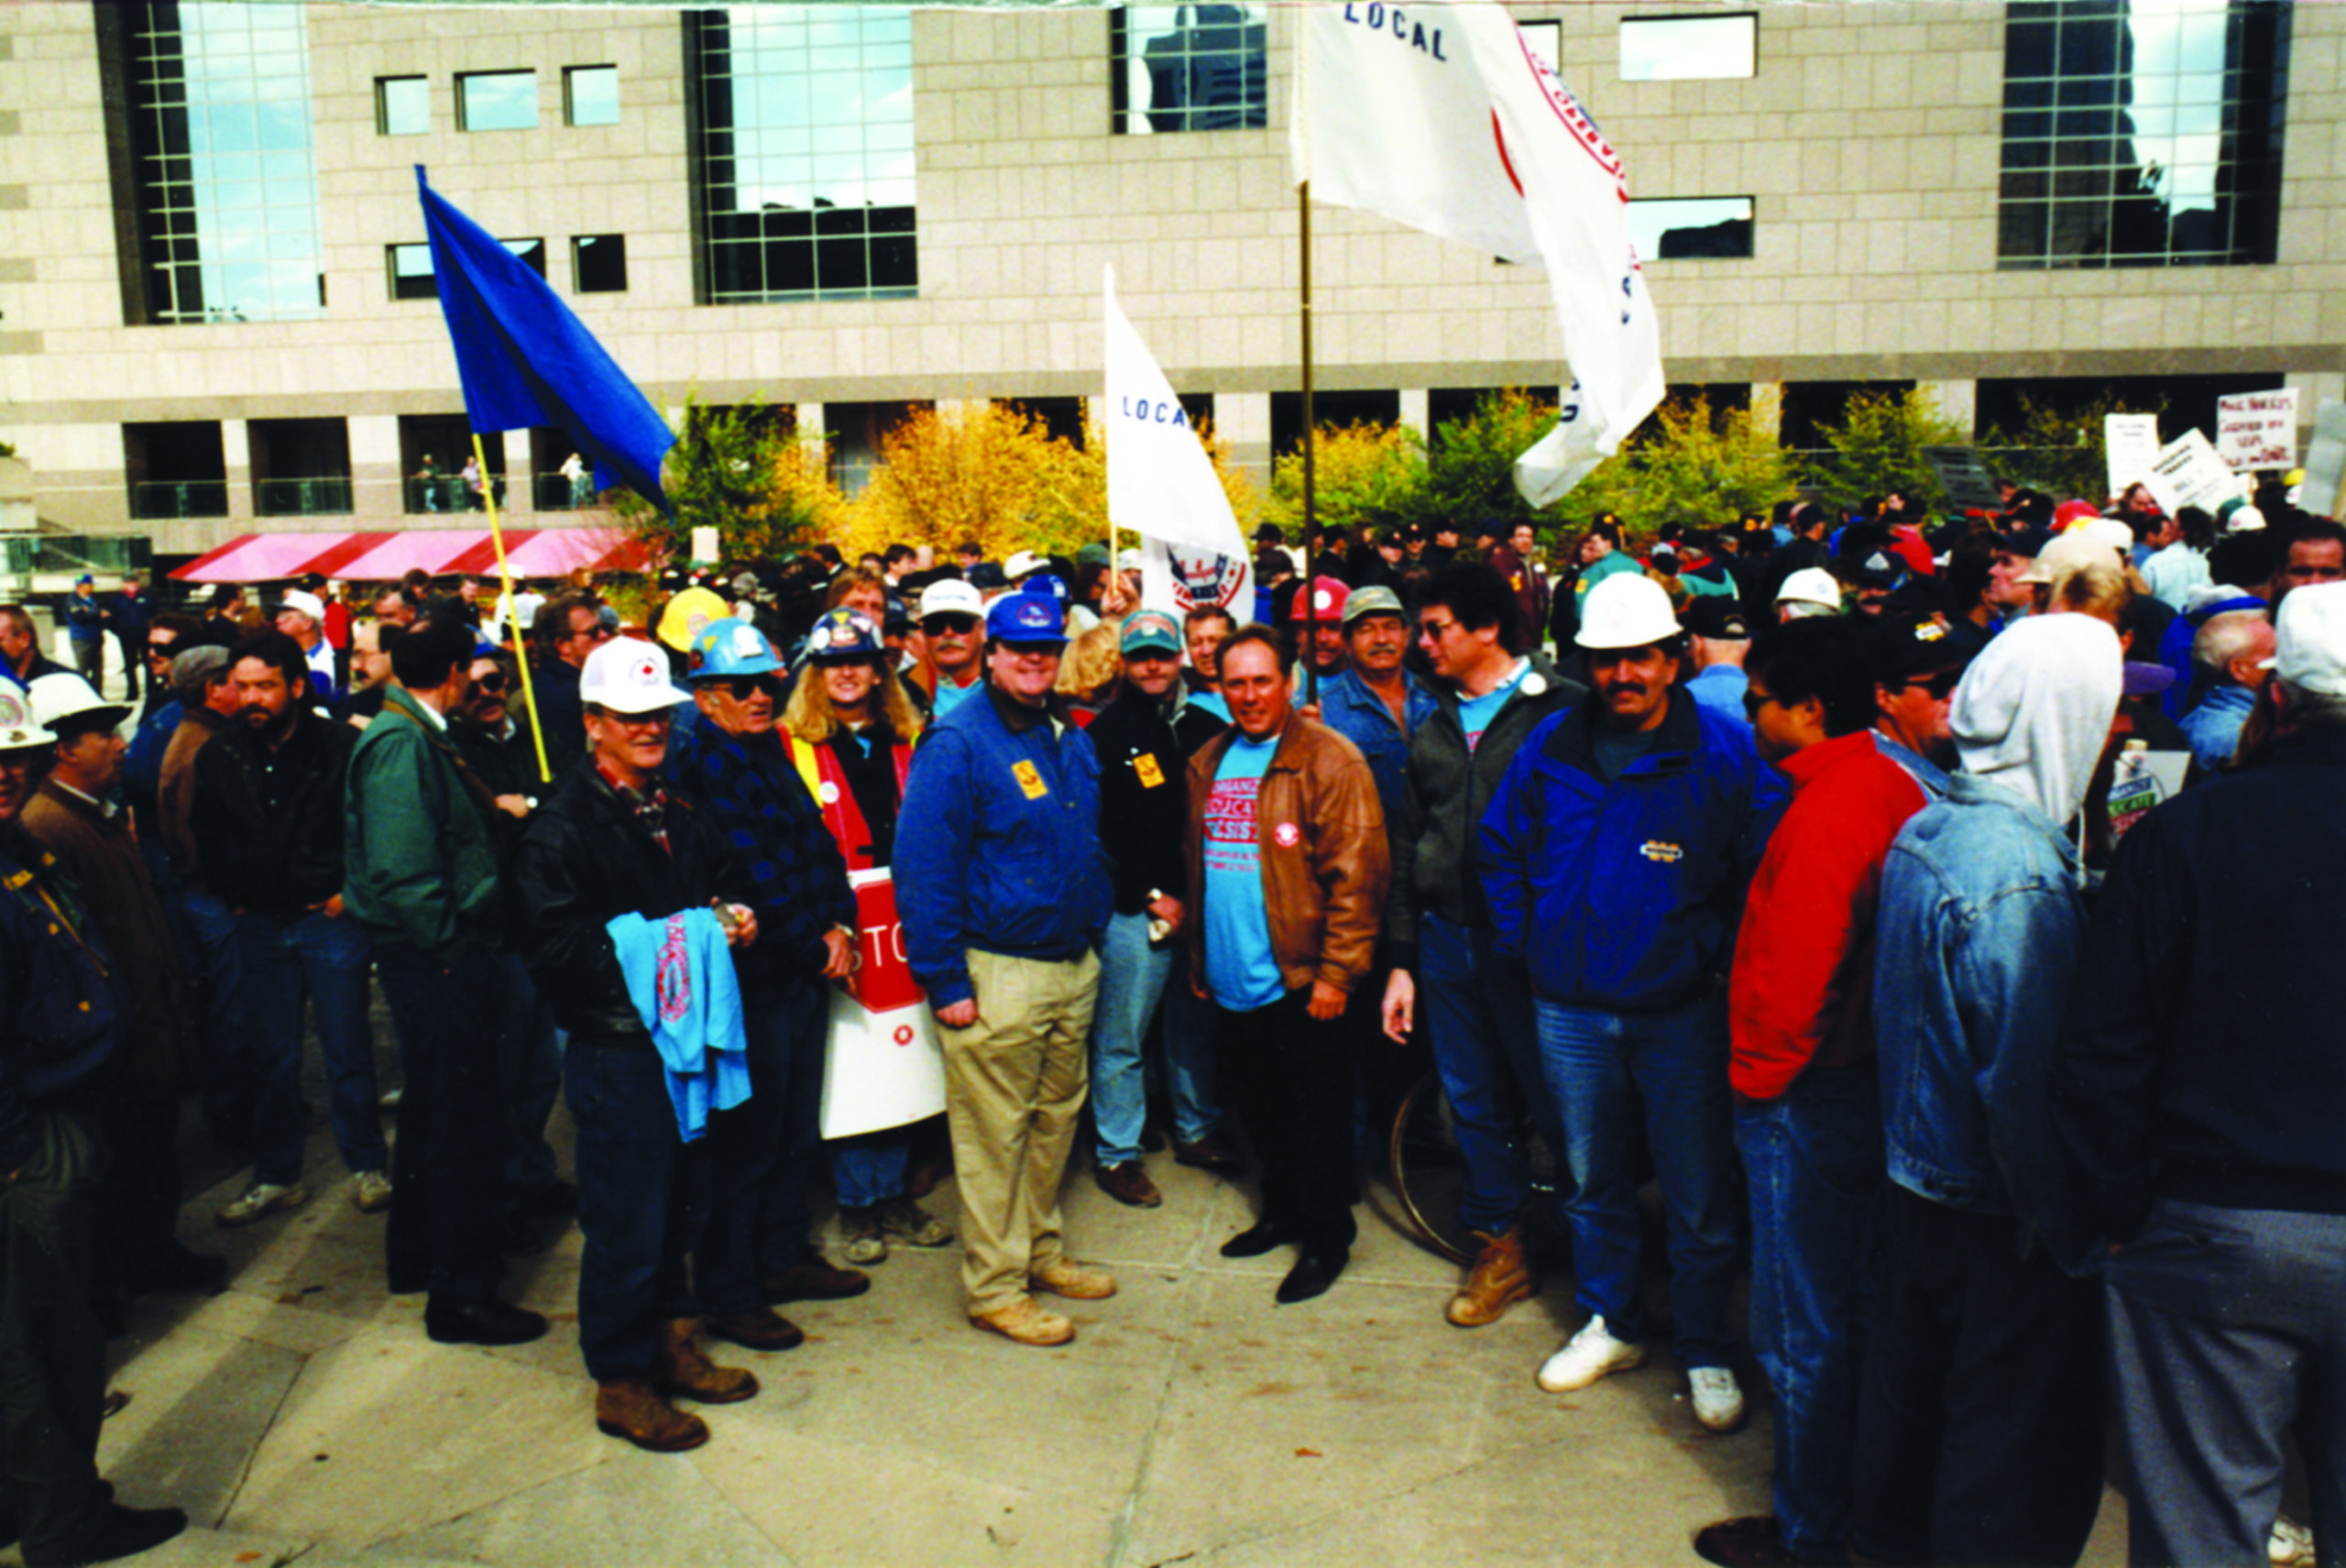 ocal 793 Business Manager Mike Gallagher and union members participated in the Days of Action protests against the Harris government in 1996. The highlight of the protest in Toronto was a massive march by thousands to the Ontario Legislature.